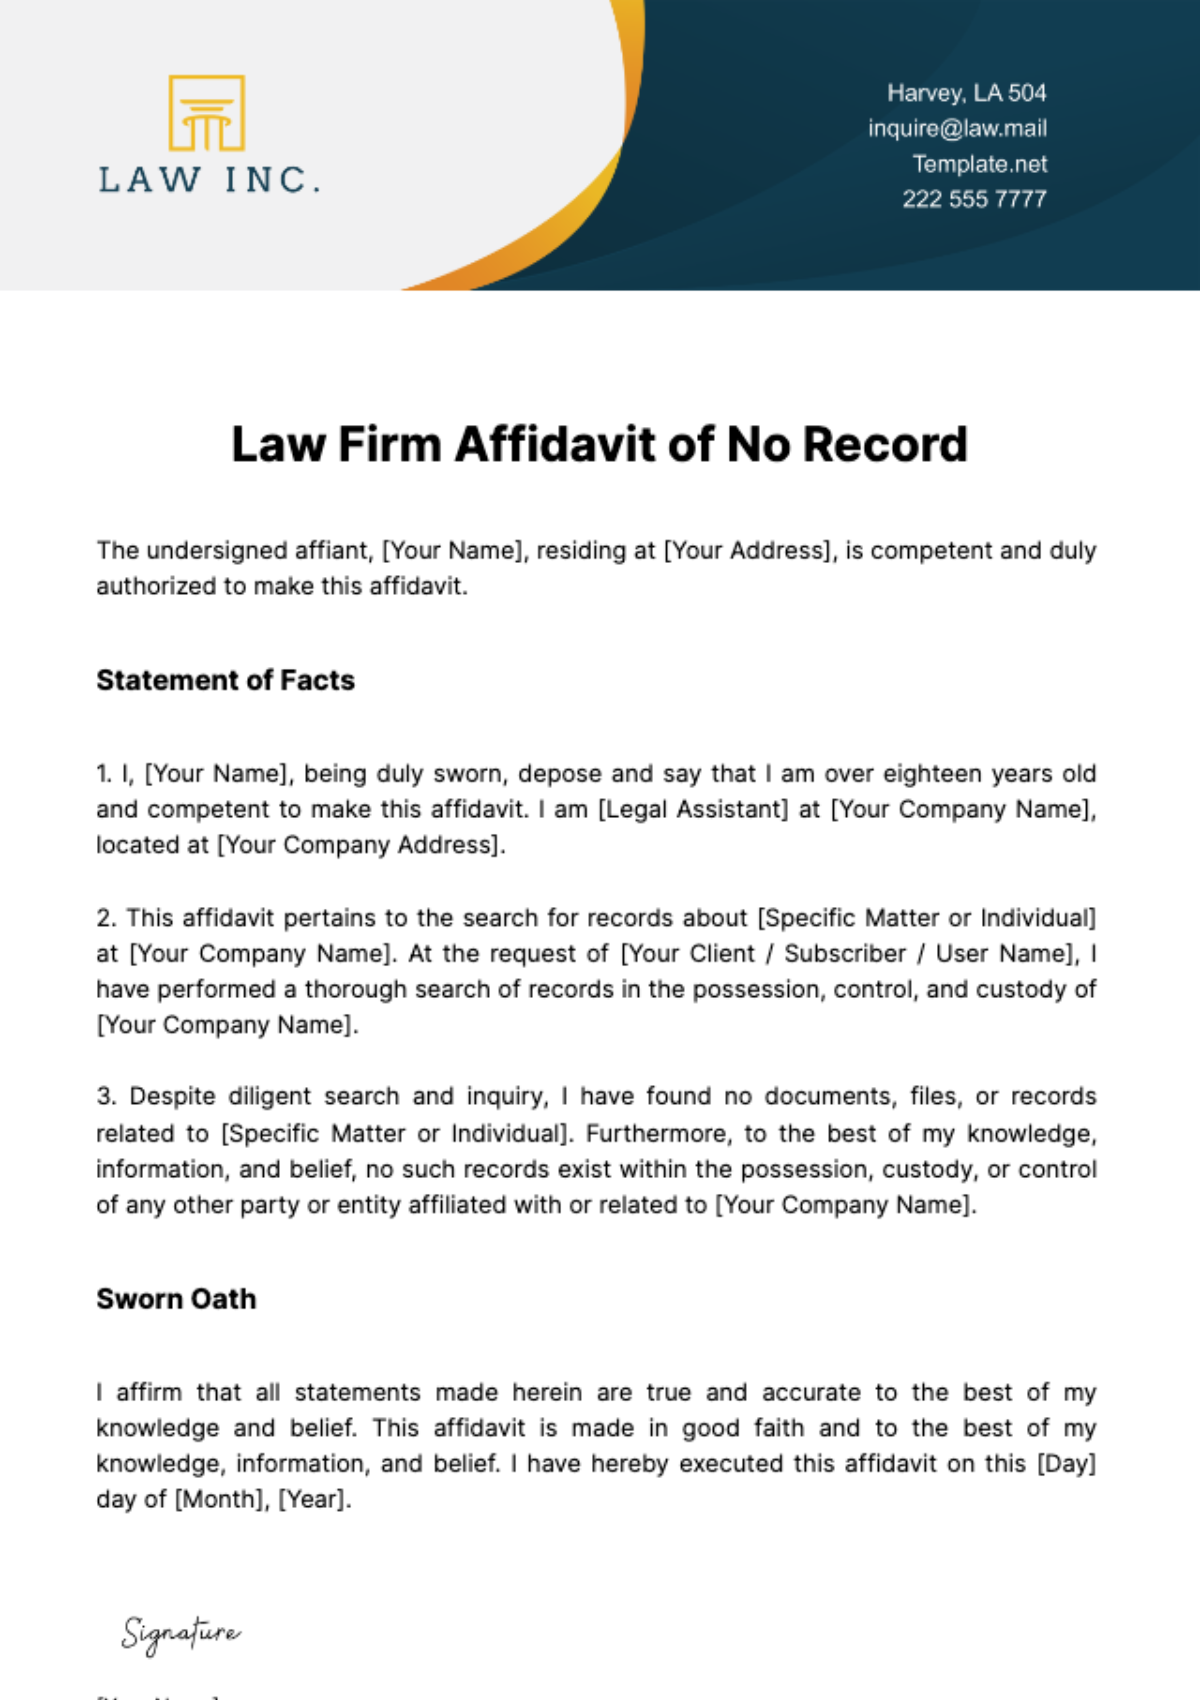 Law Firm Affidavit of No Record Template